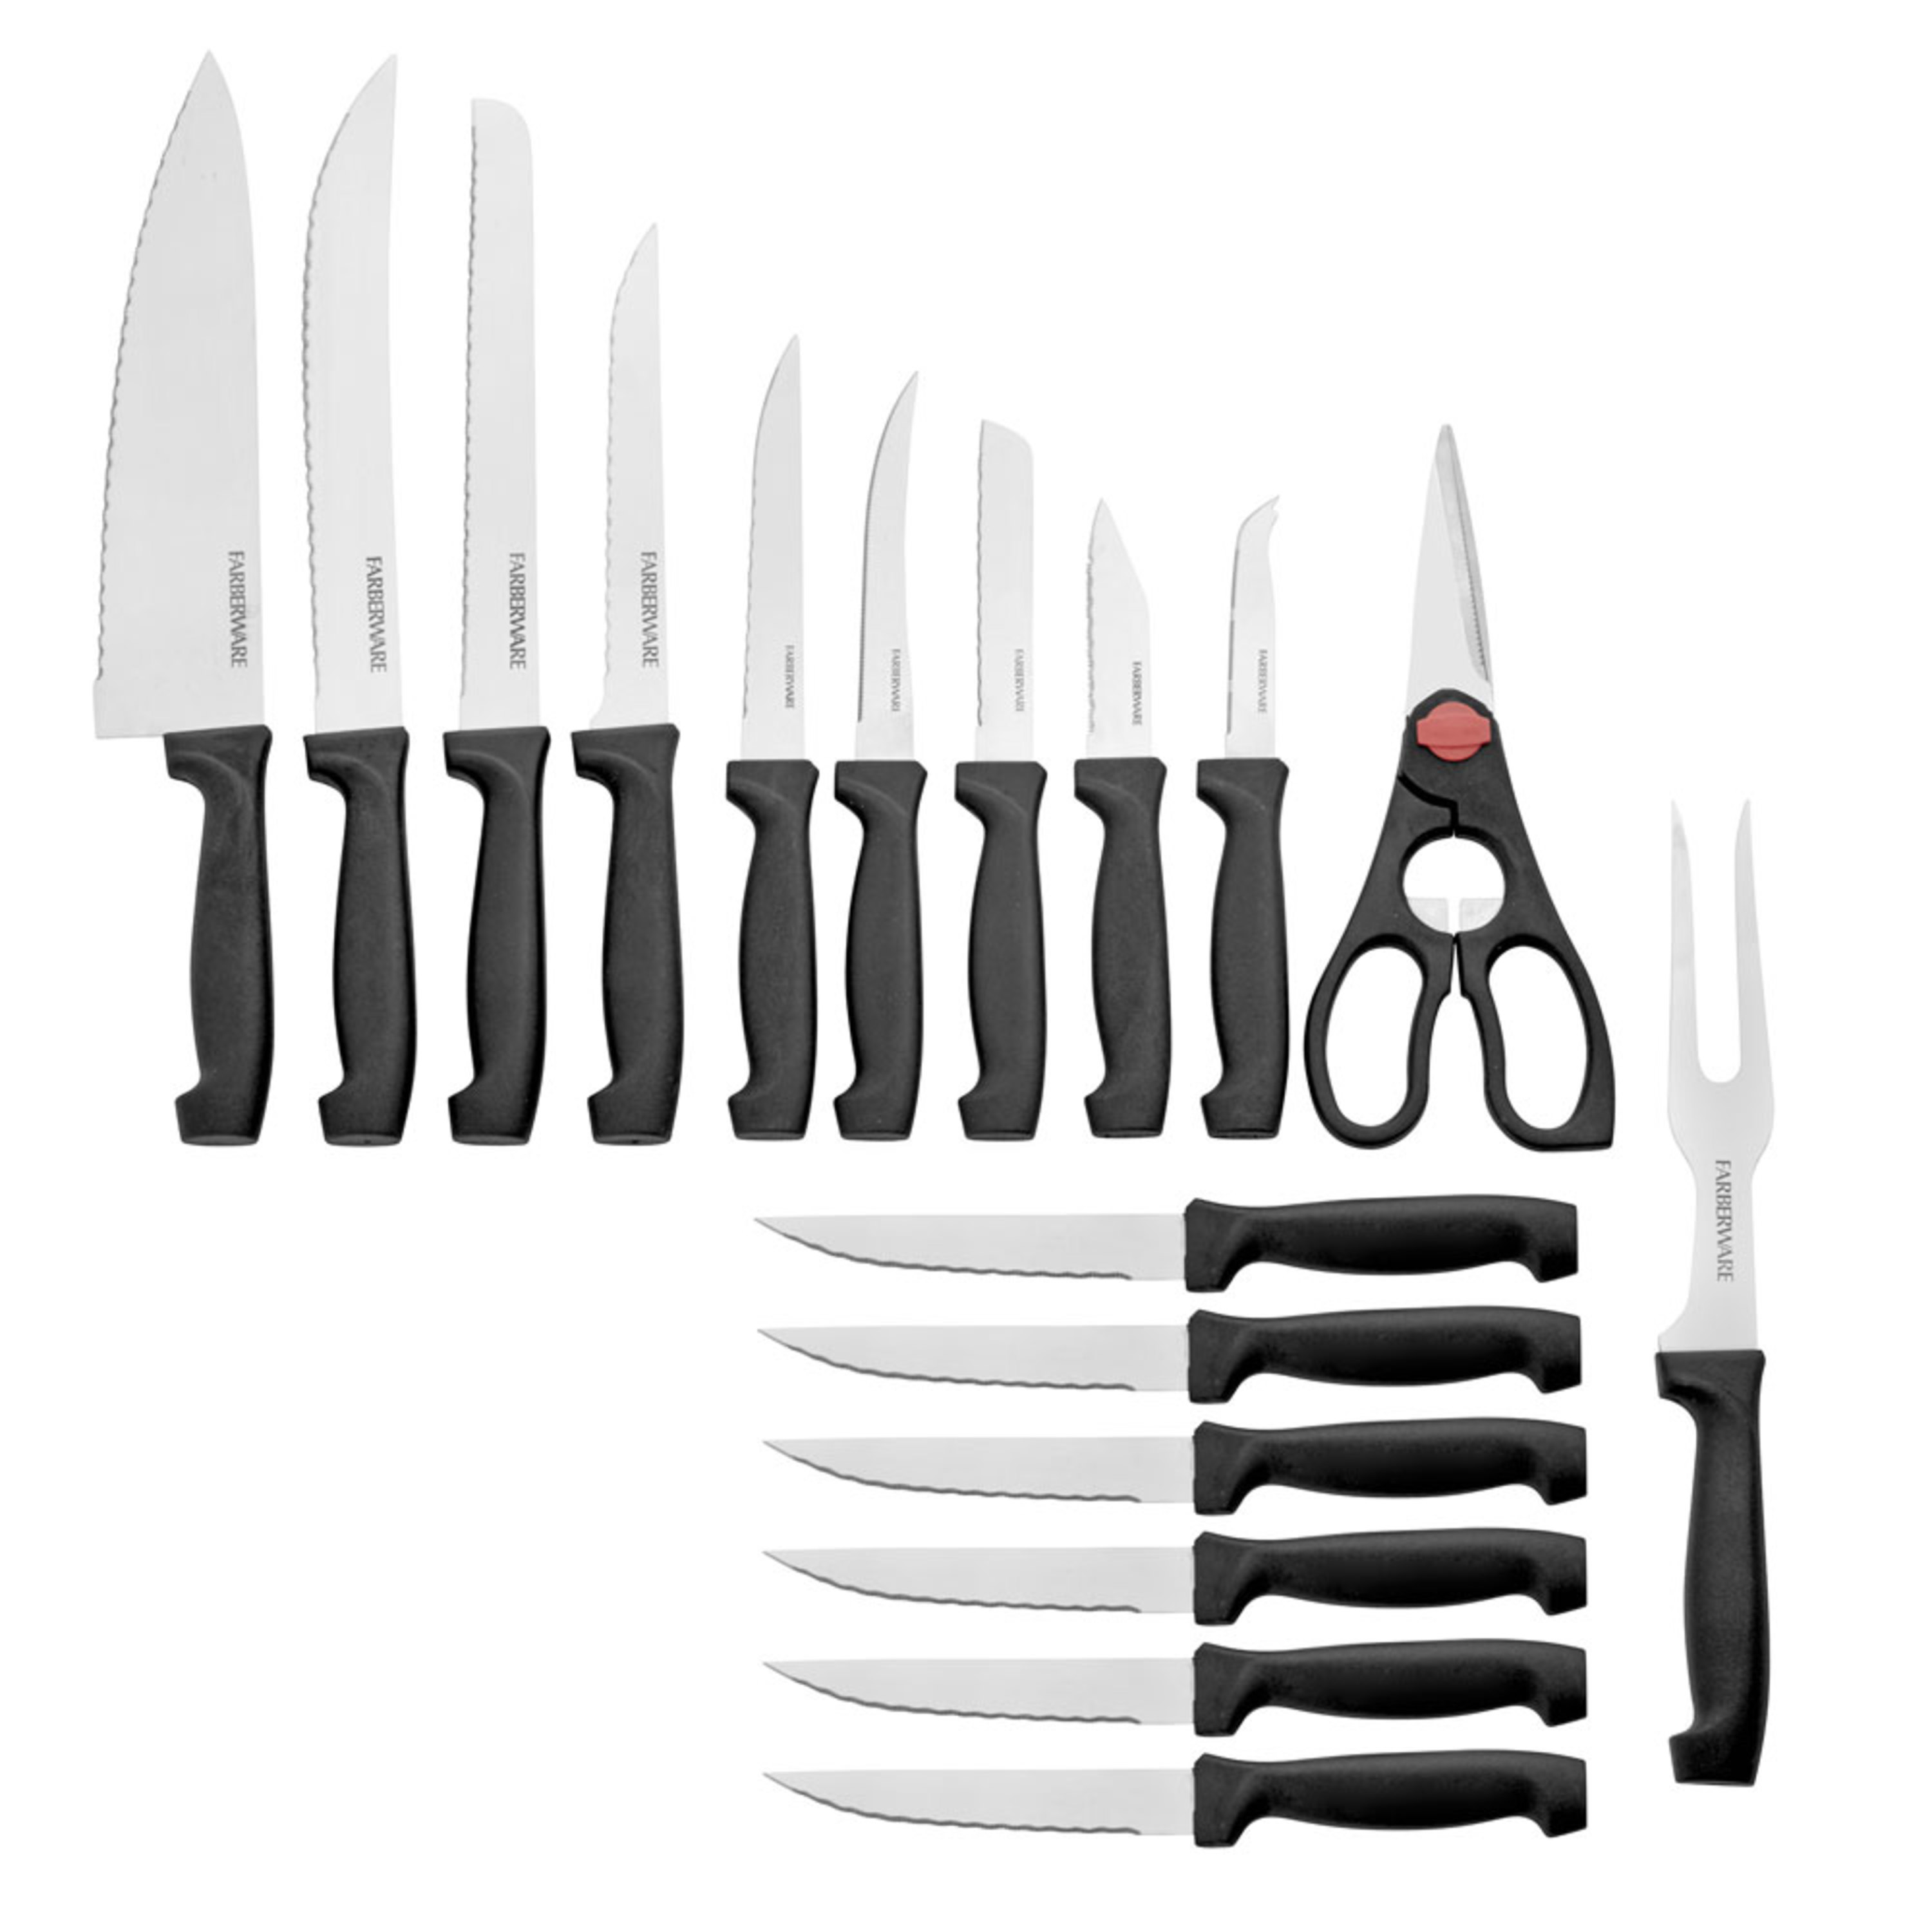 Farberware 18-Piece Never Needs Sharpening Stainless Steel Knife Set with Block Natural Wood - image 5 of 16